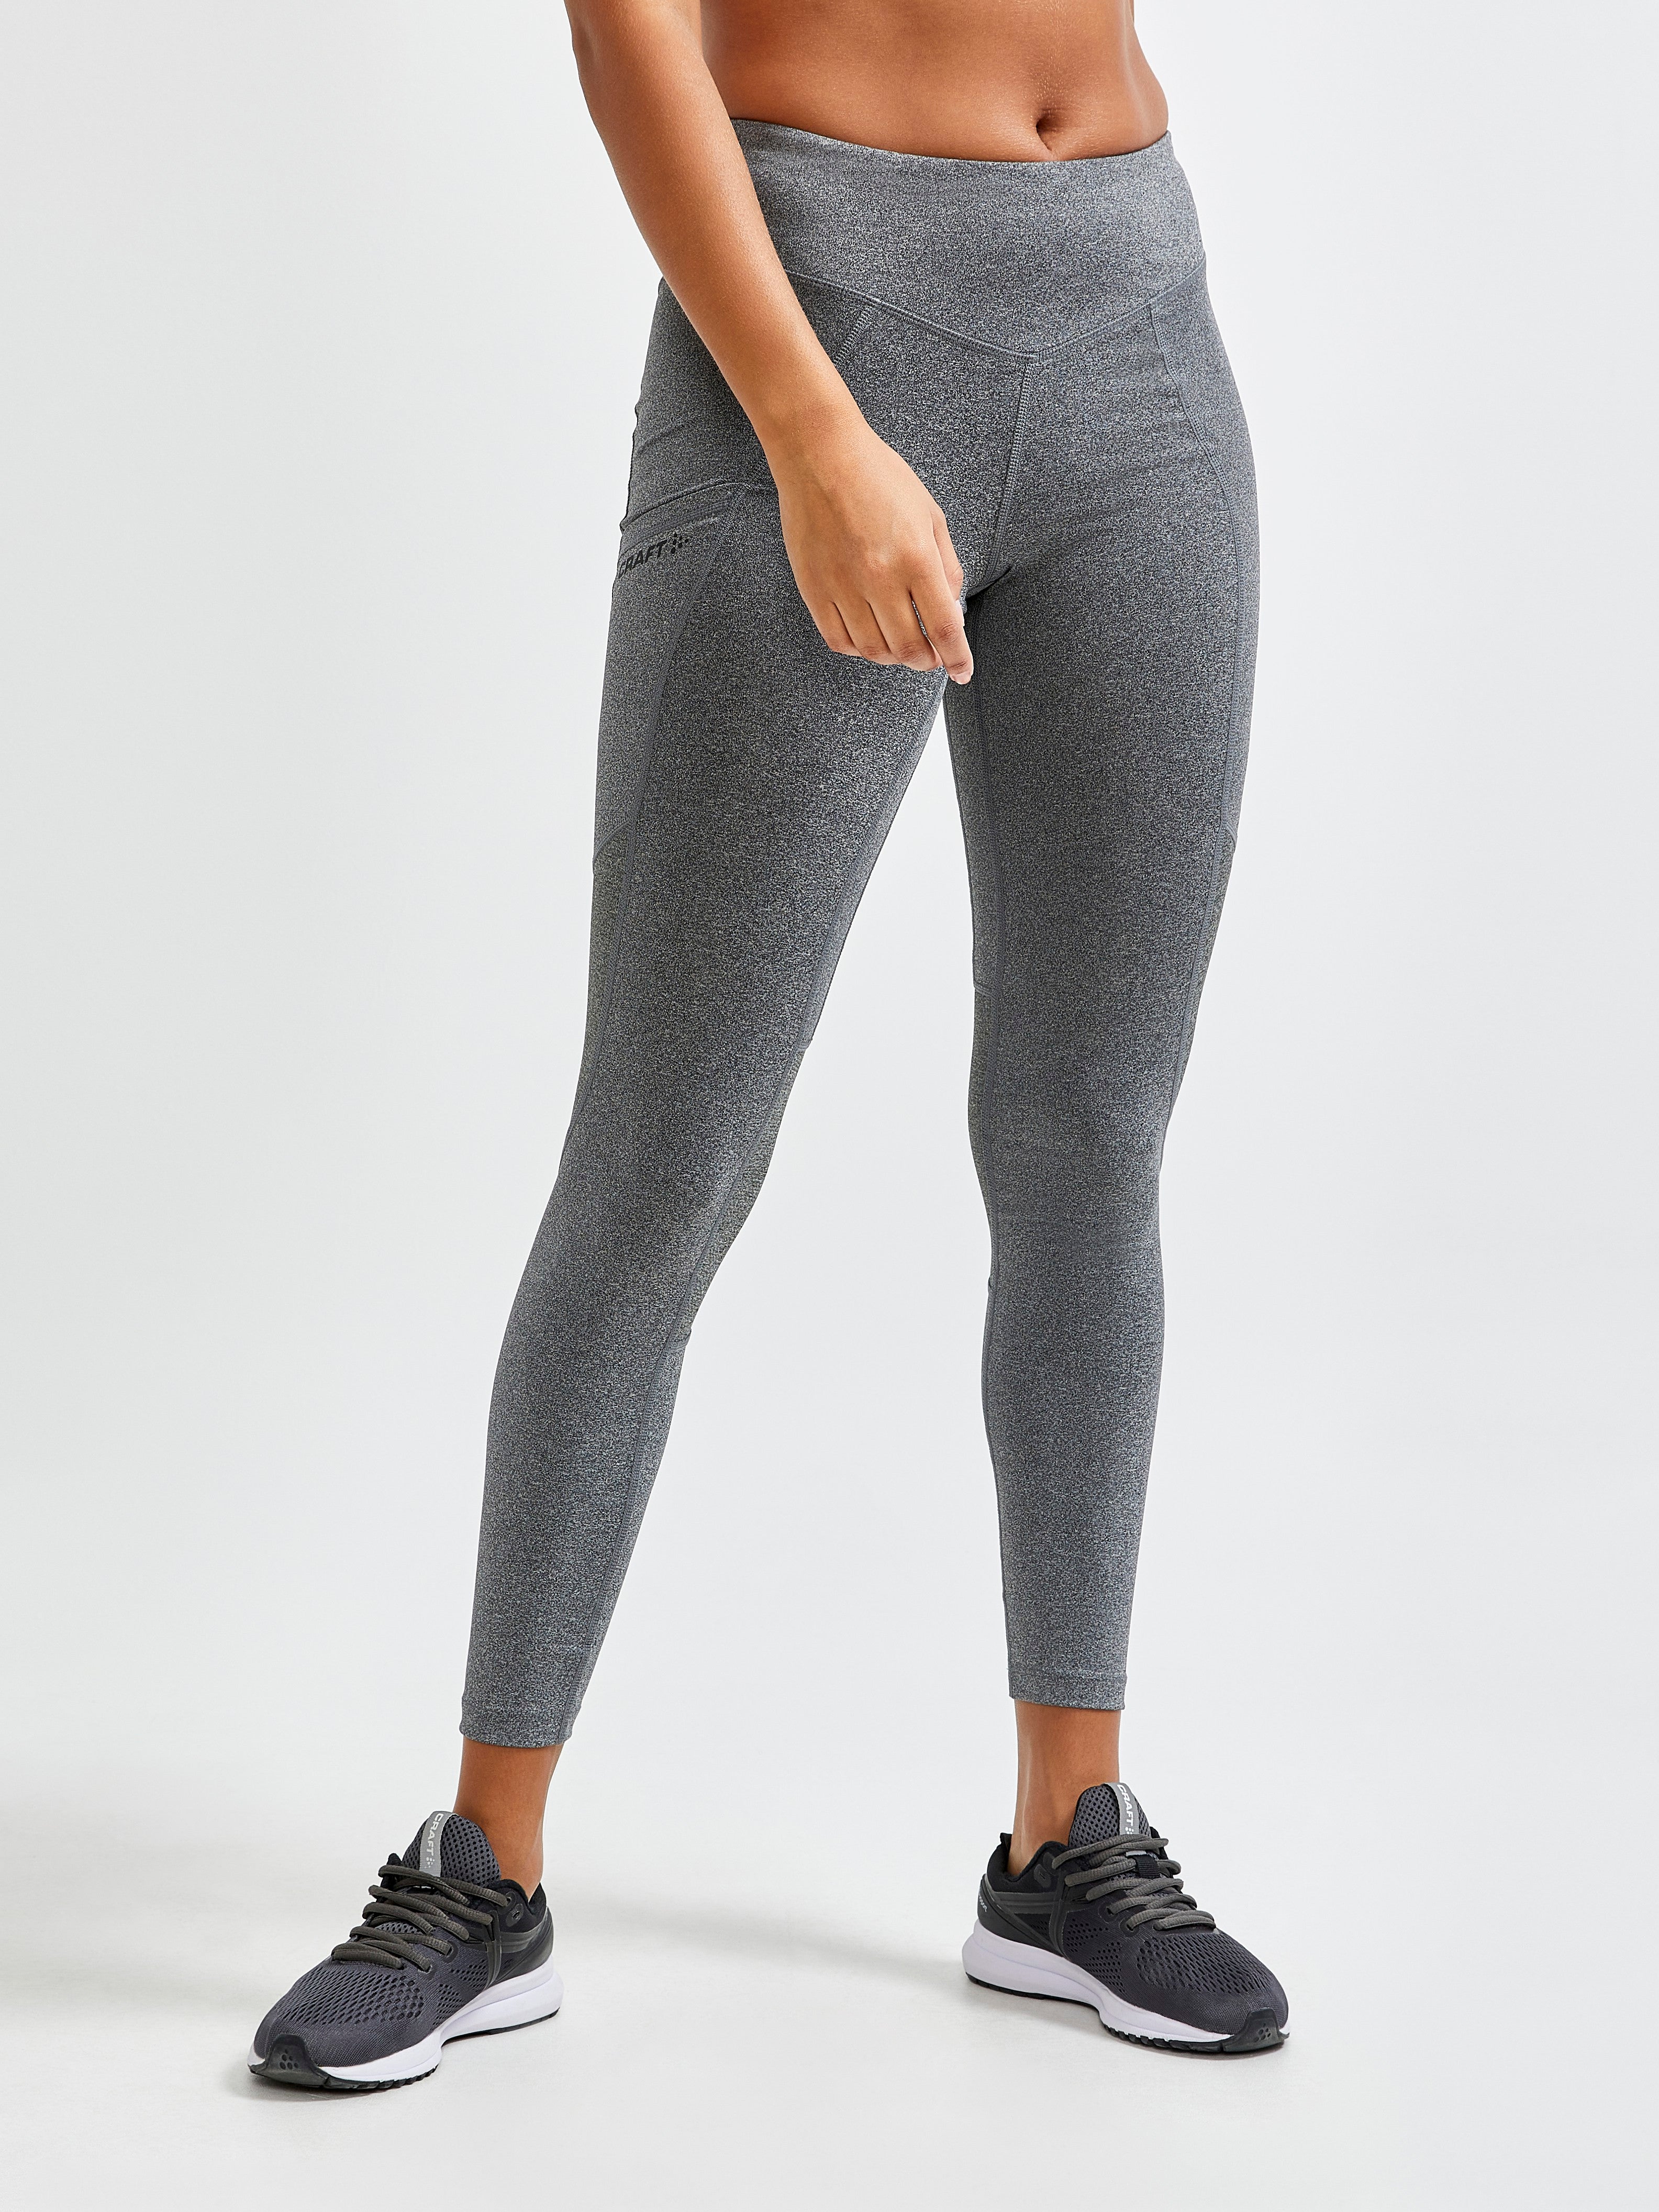 Women's Sports, Workout Tights & Athletic Leggings – Craft Sports